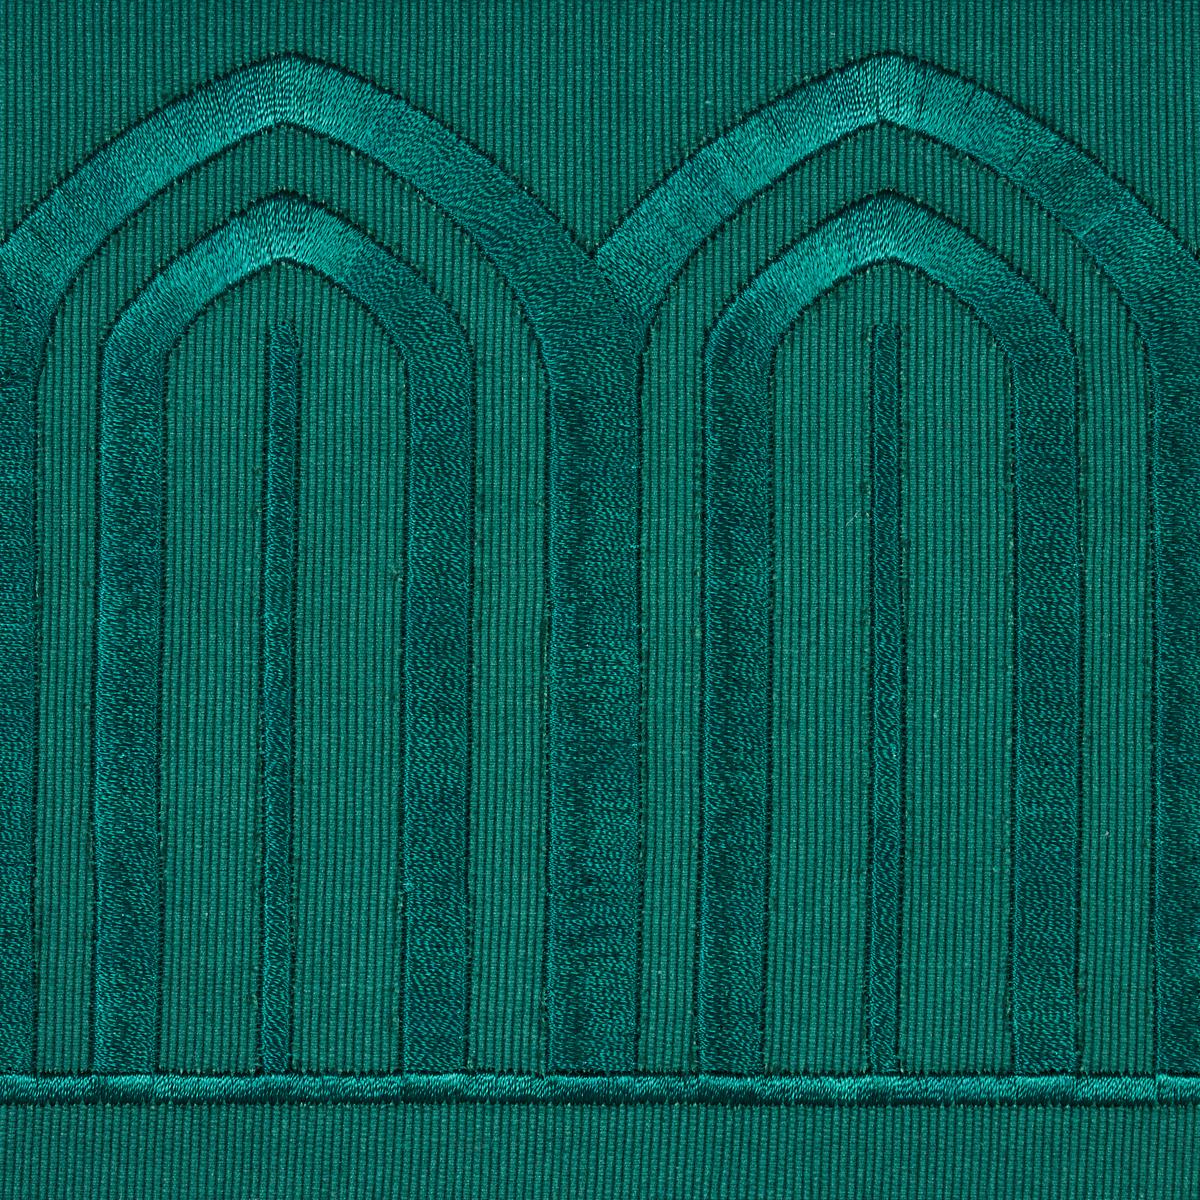 ARCHES EMBROIDERED TAPE WIDE_EMERALD